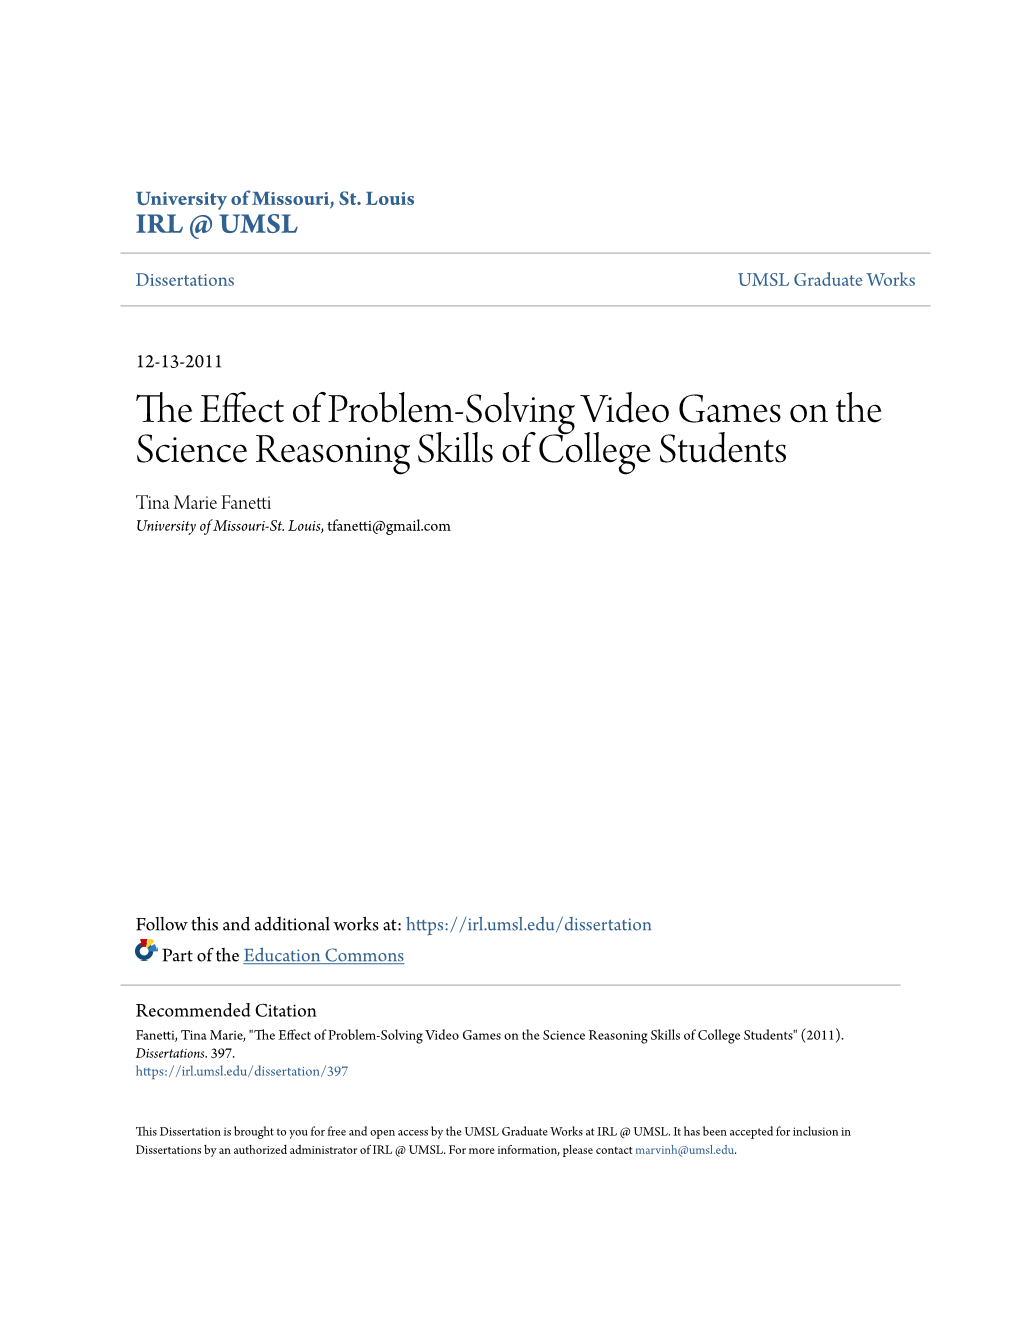 The Effect of Problem-Solving Video Games on the Science Reasoning Skills of College Students" (2011)